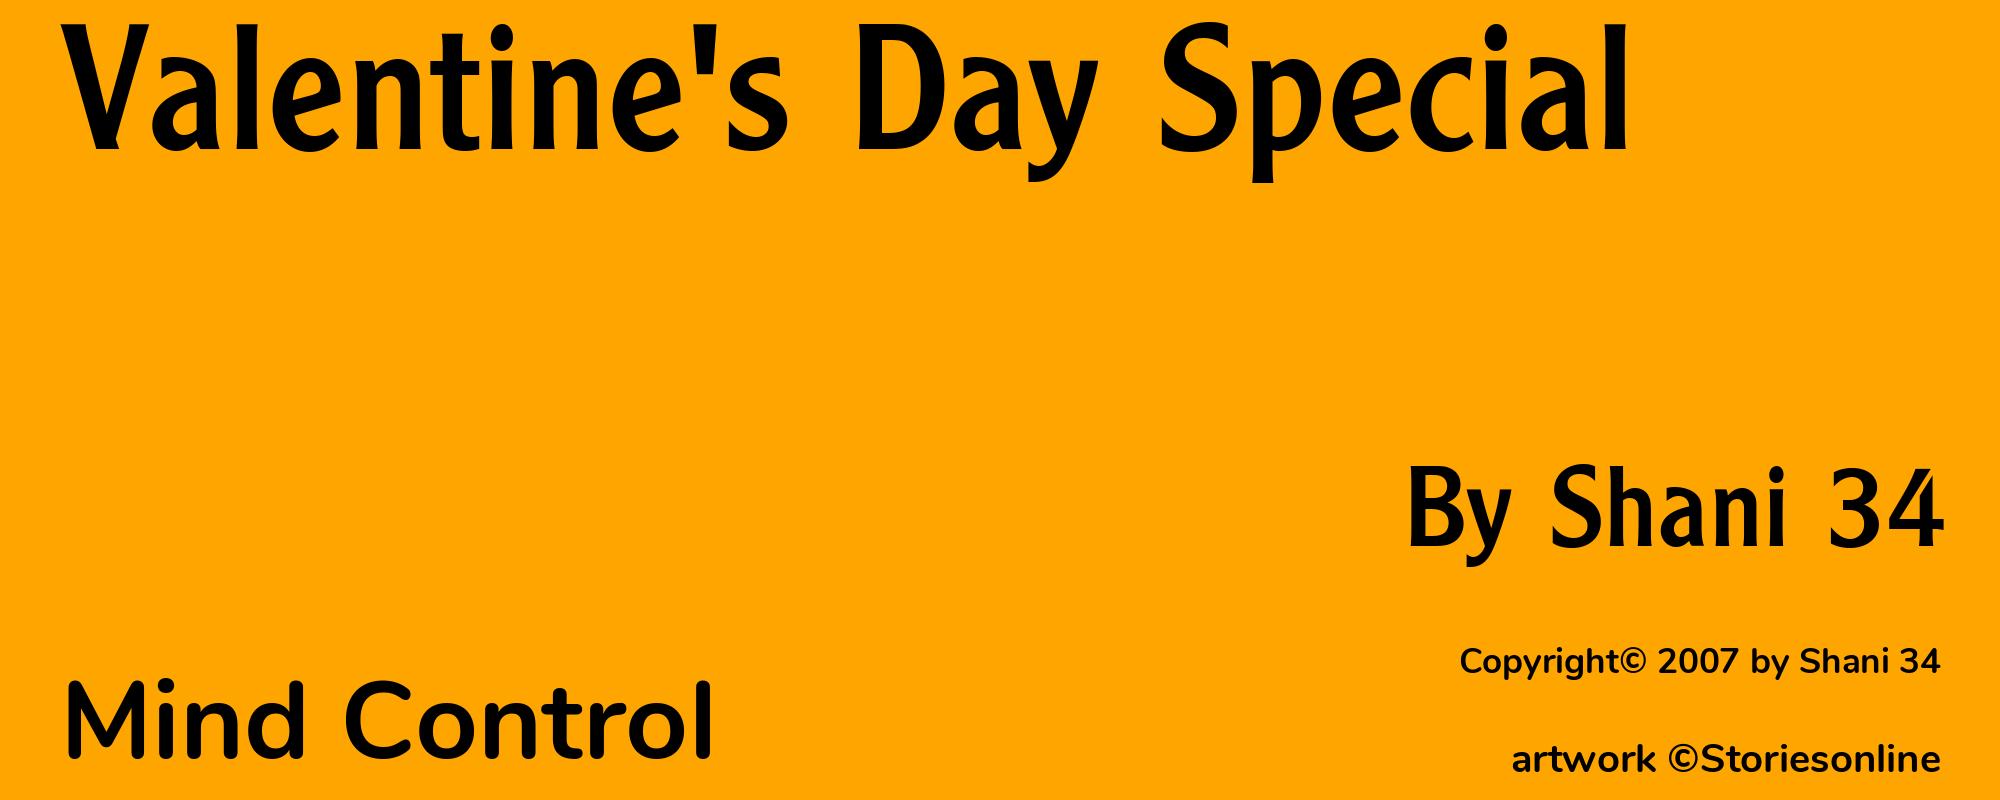 Valentine's Day Special - Cover